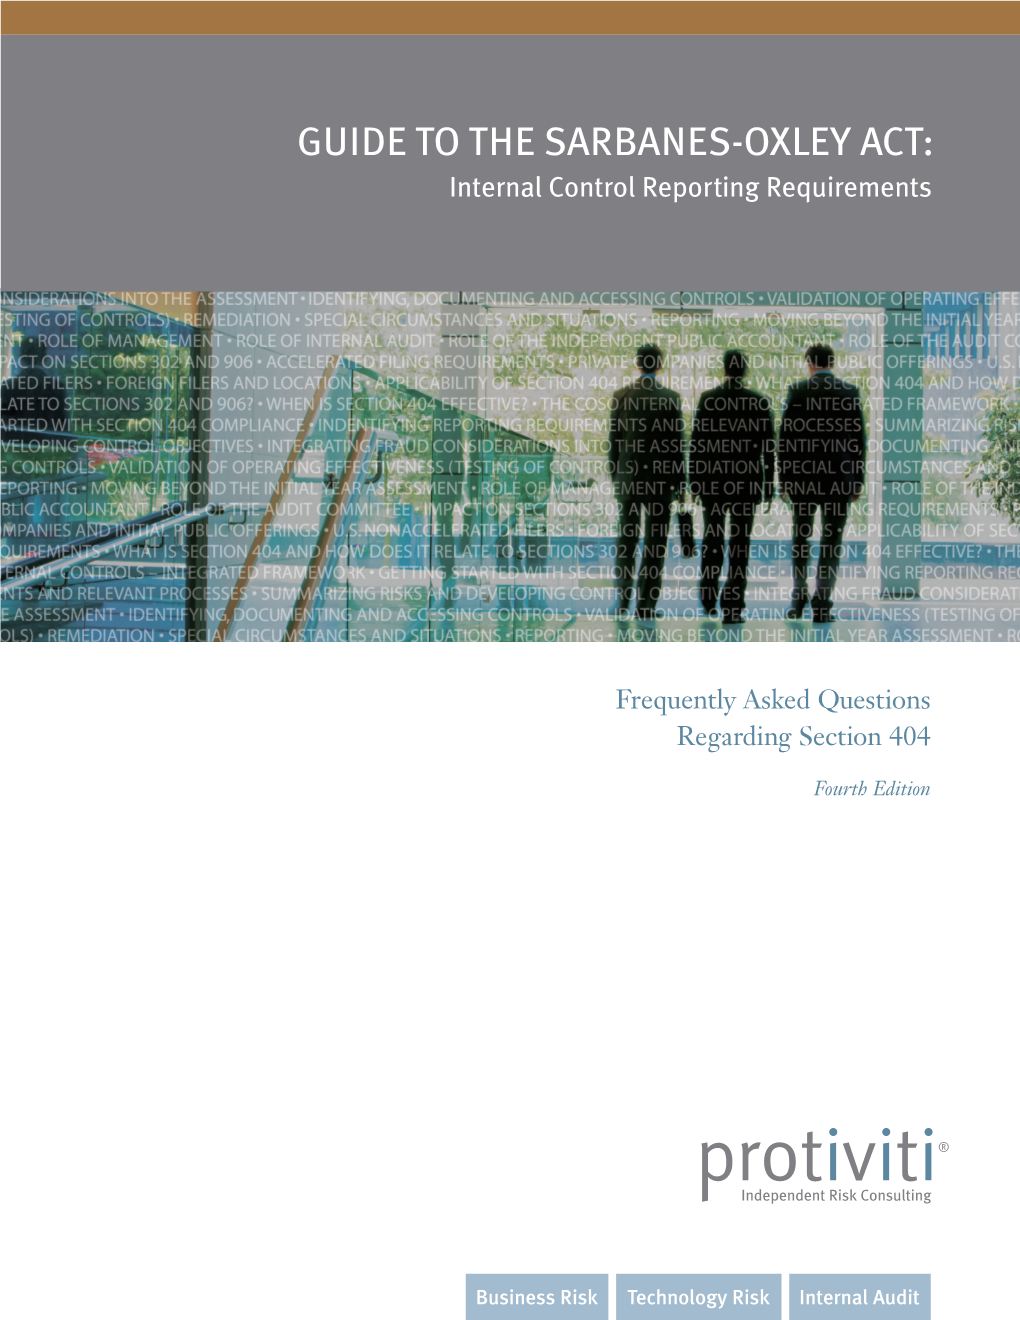 Guide to the Sarbanes-Oxley Act: Internal Controls Reporting Requirements